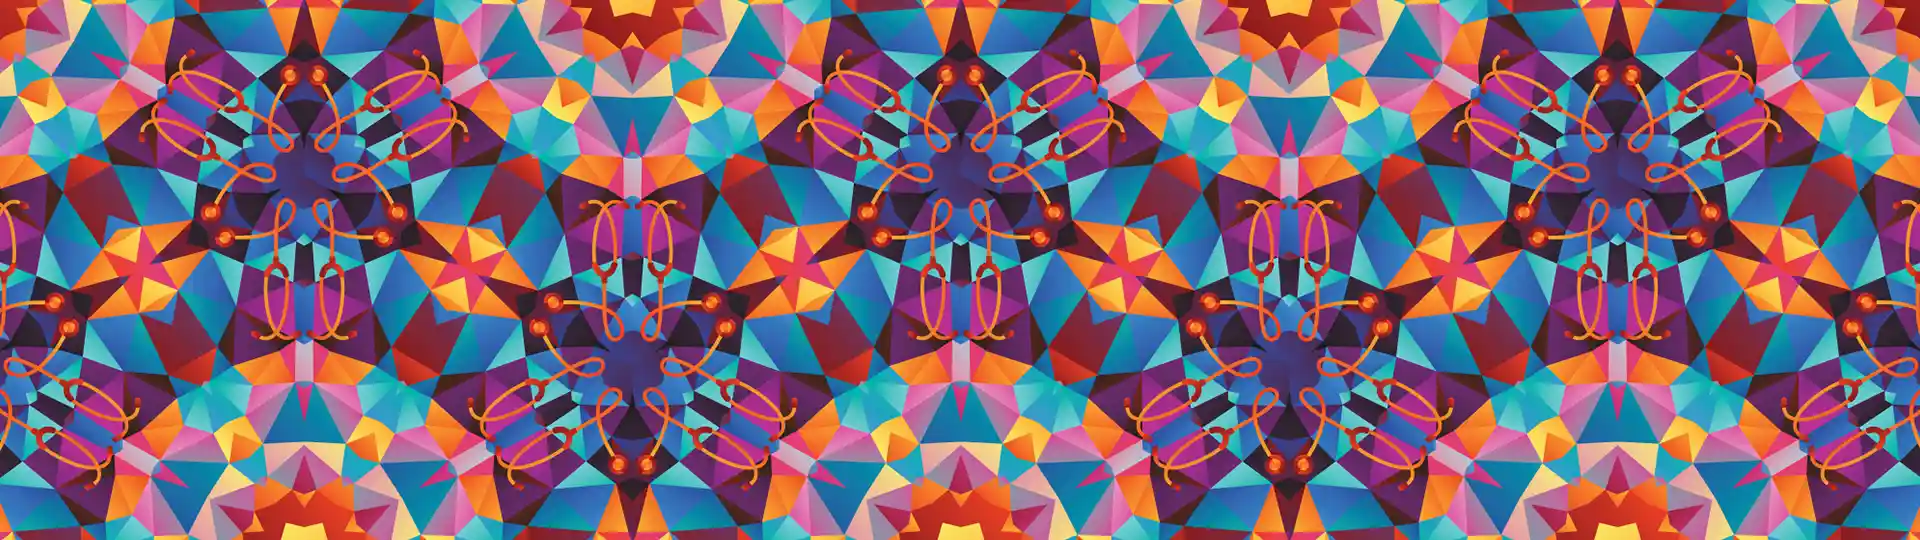 A kaleidoscope pattern featuring stethoscopes for the Inova Honors Gala branding.